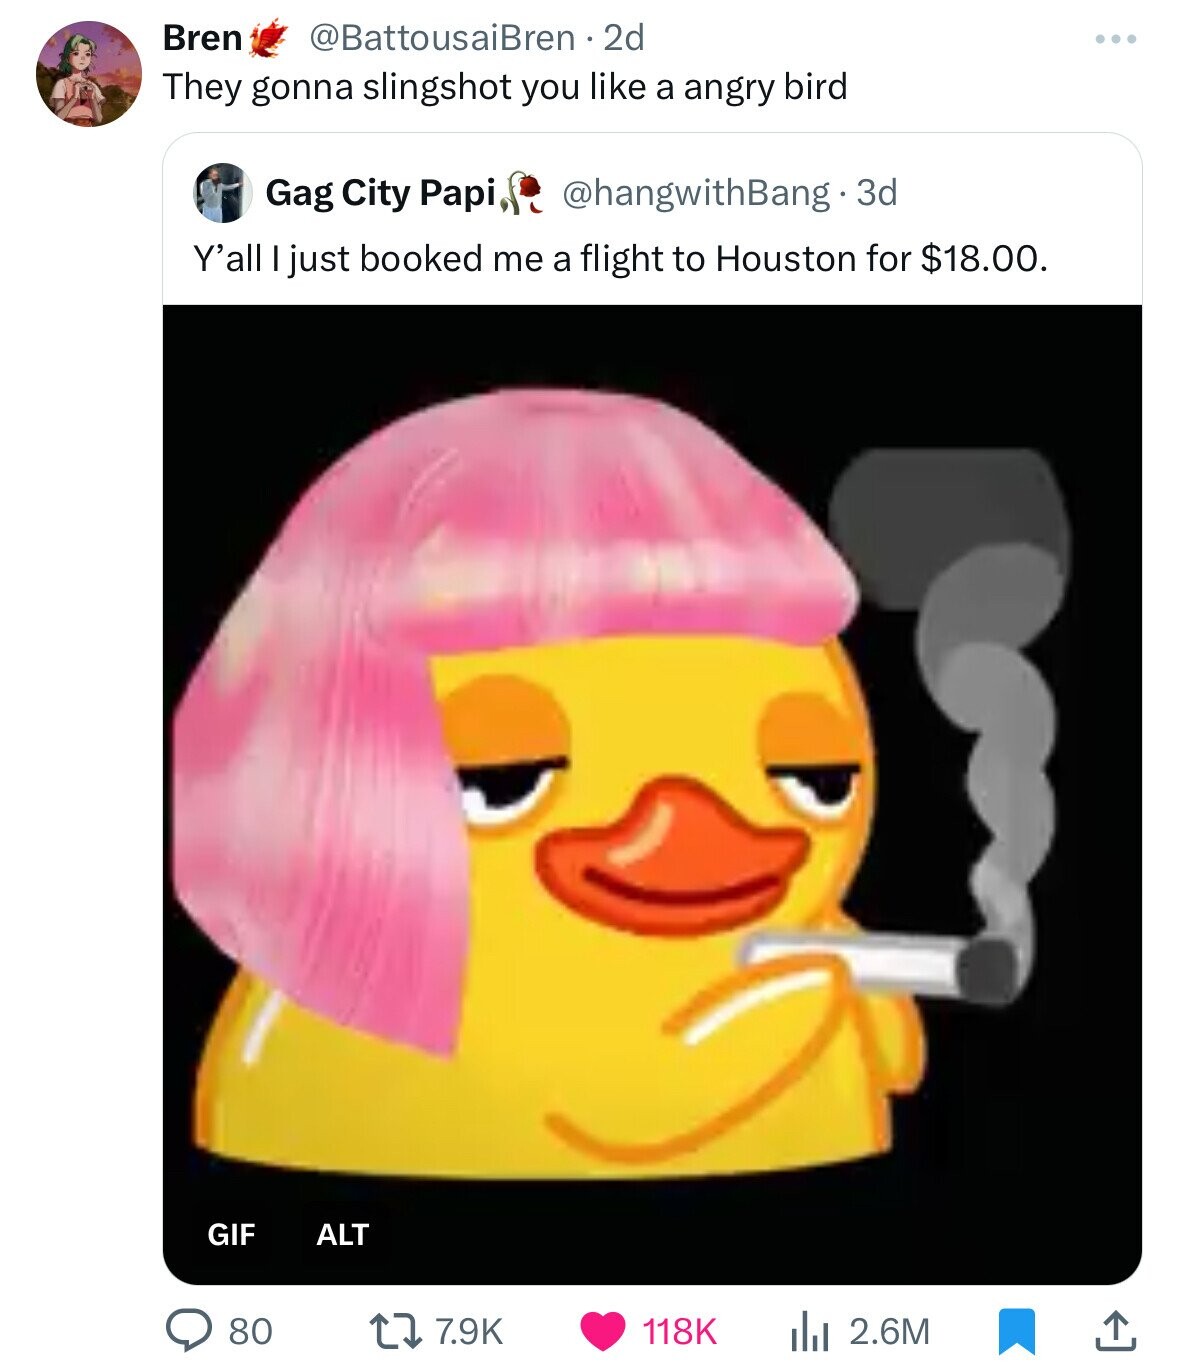 classic duck smoking gif - Bren 2d They gonna slingshot you a angry bird Gag City Papi, 3d Y'all I just booked me a flight to Houston for $18.00. Gif Alt 80 Ilil 2.6M